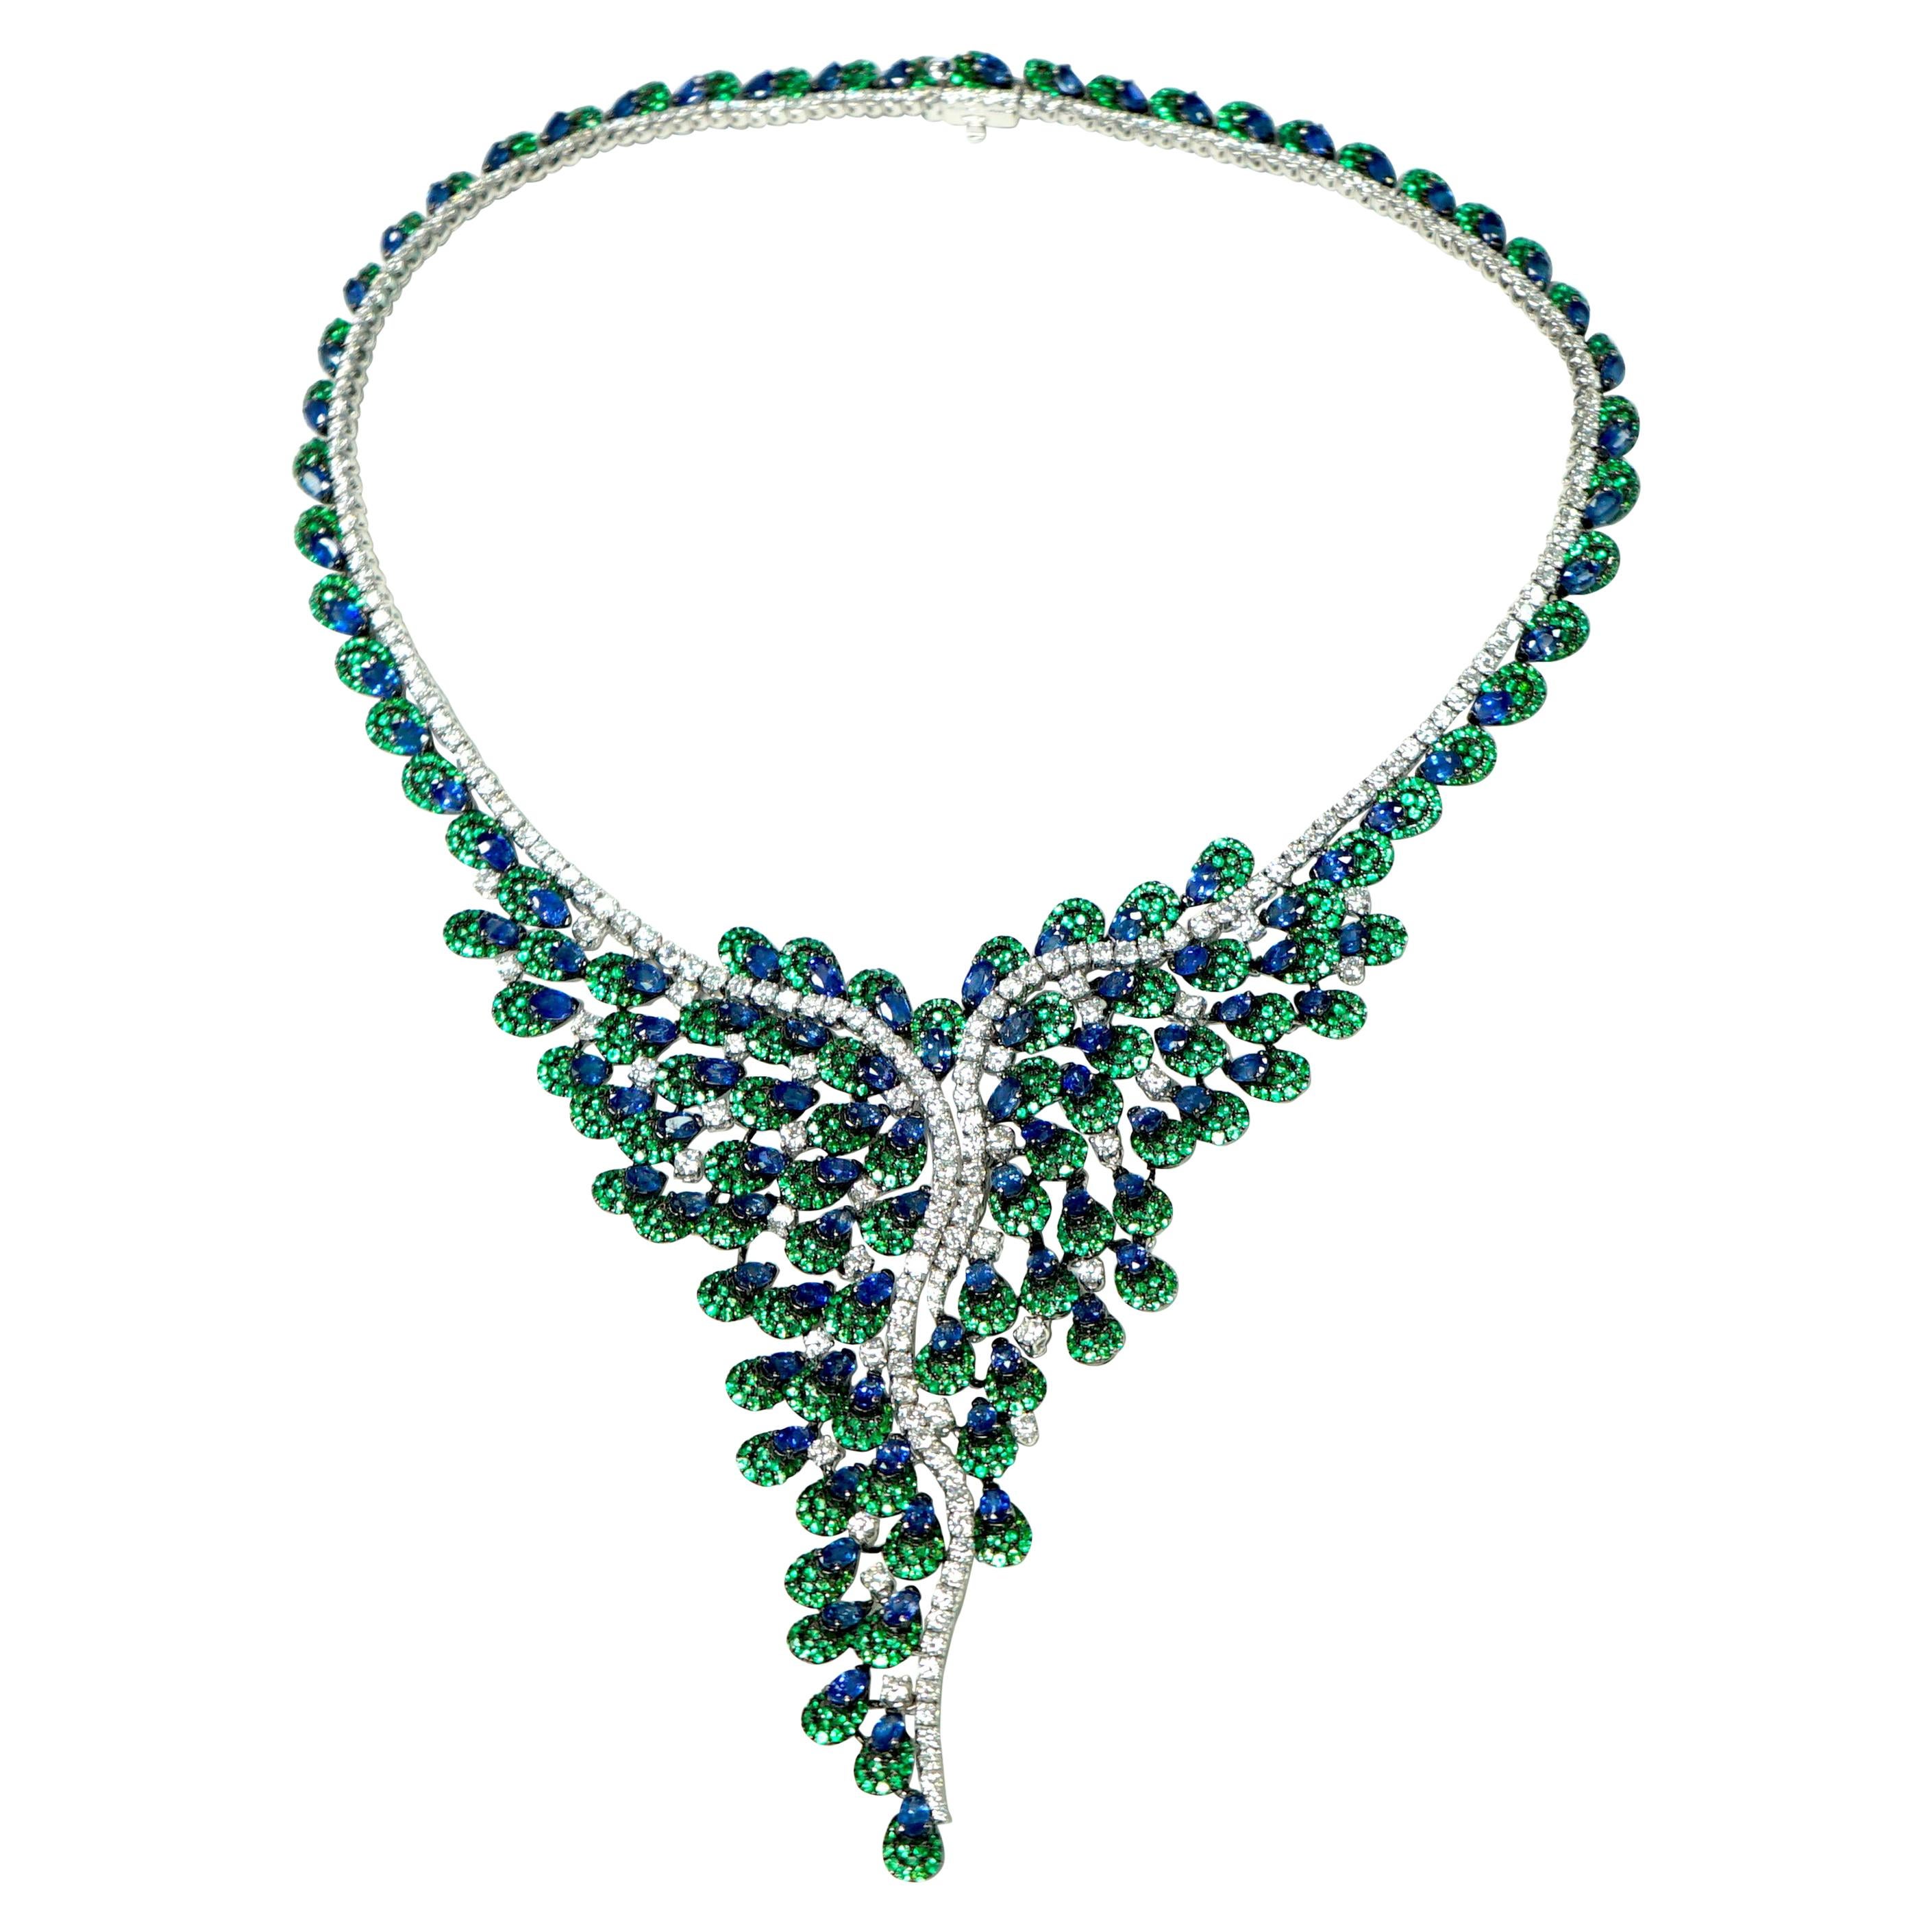 One of a Kind Yvel Sapphire Tsavorite Diamond Necklace from the Peacock Coll